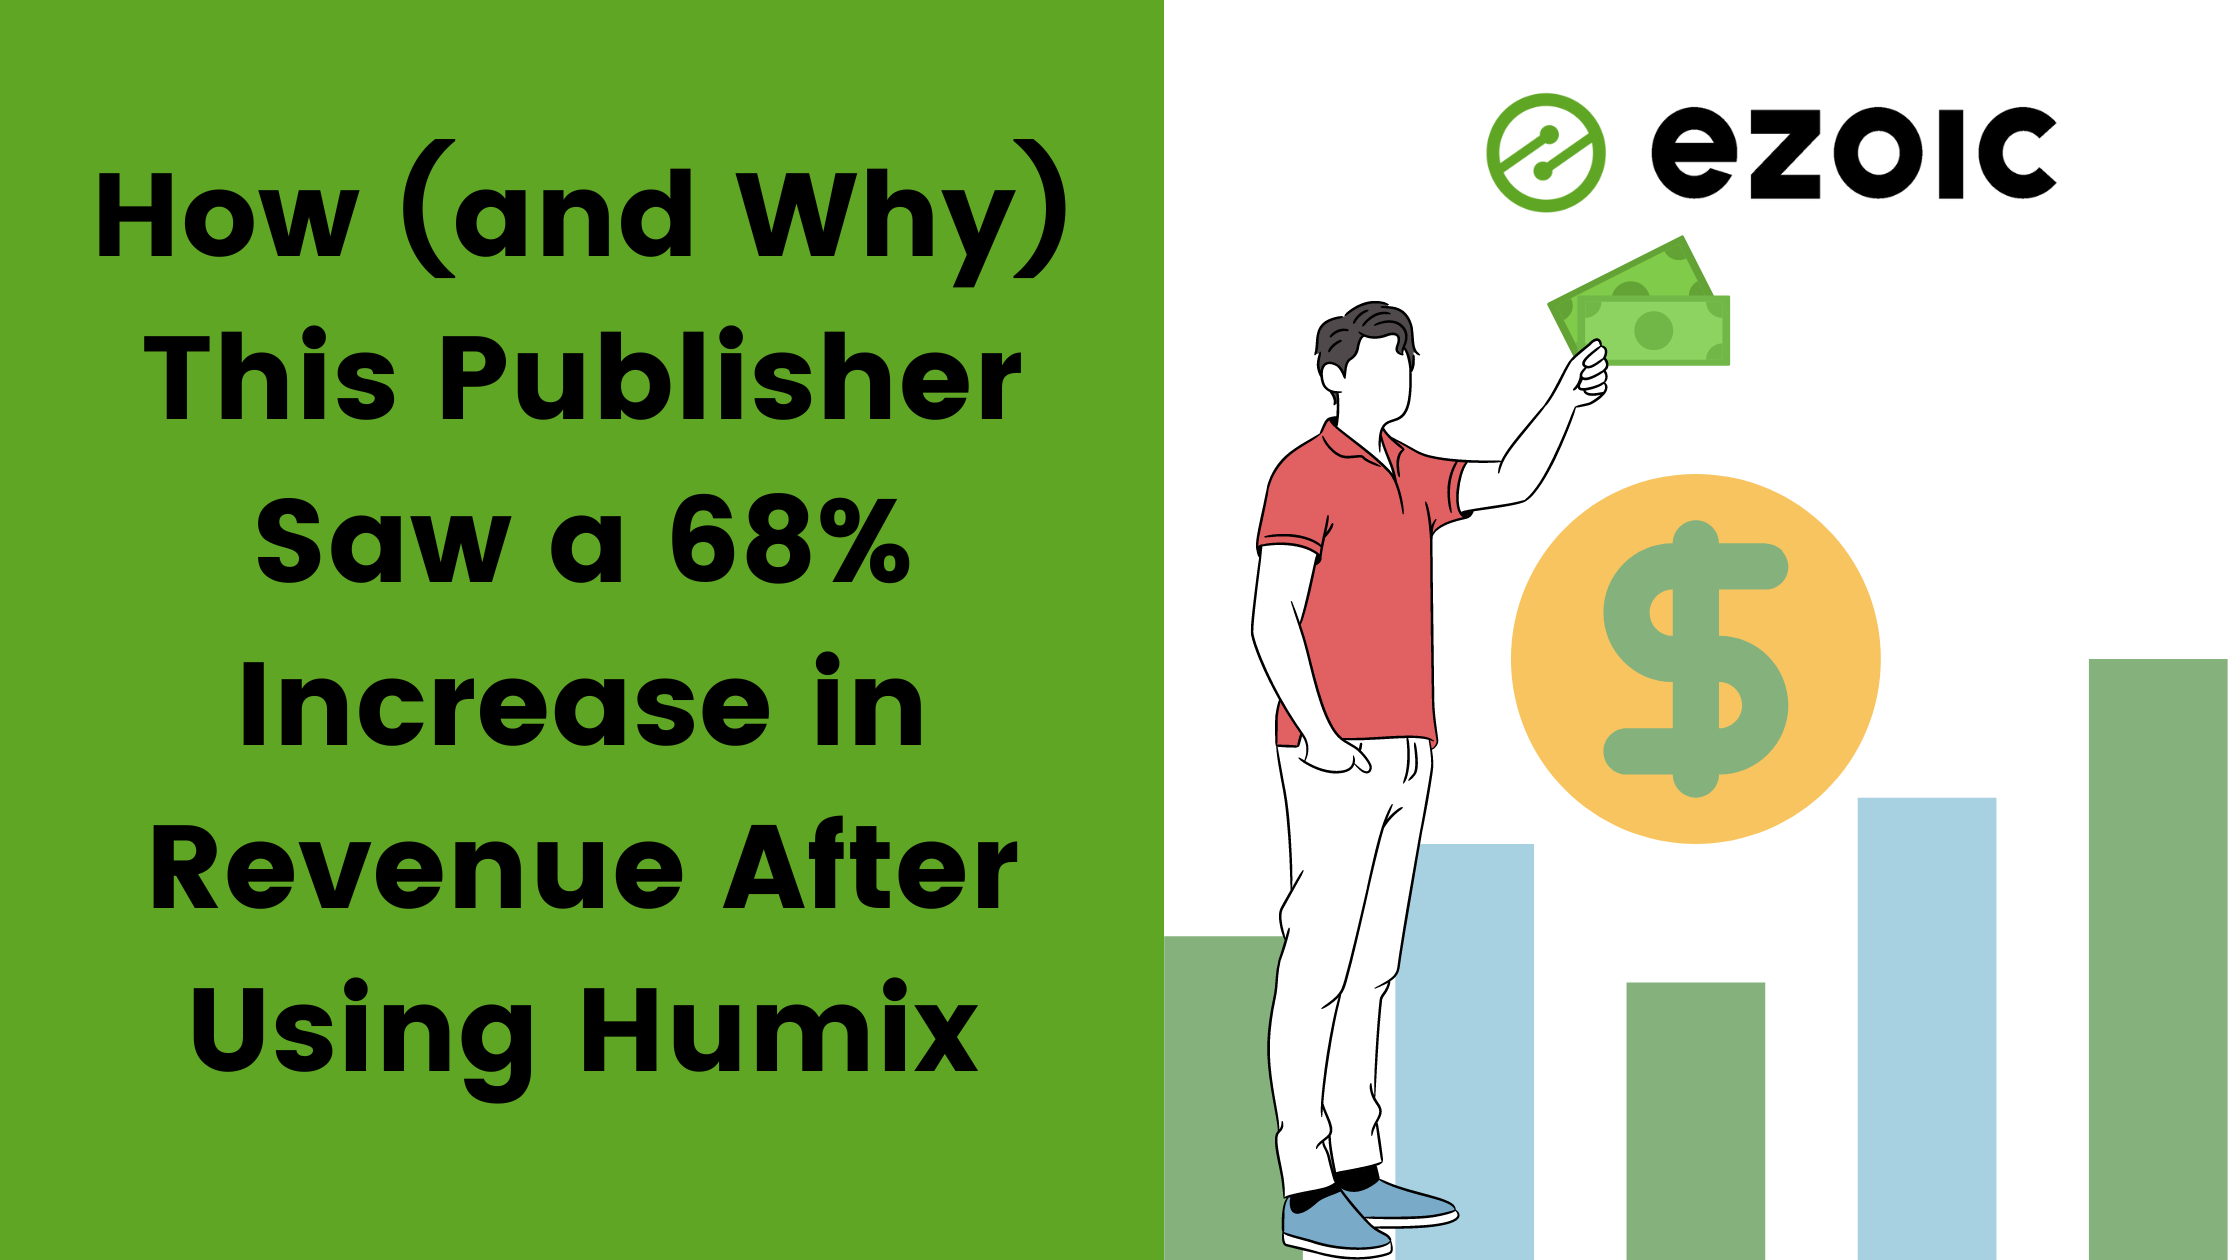 <strong>How (and Why) This Publisher Saw a 68% Increase in Revenue After Using Humix</strong>